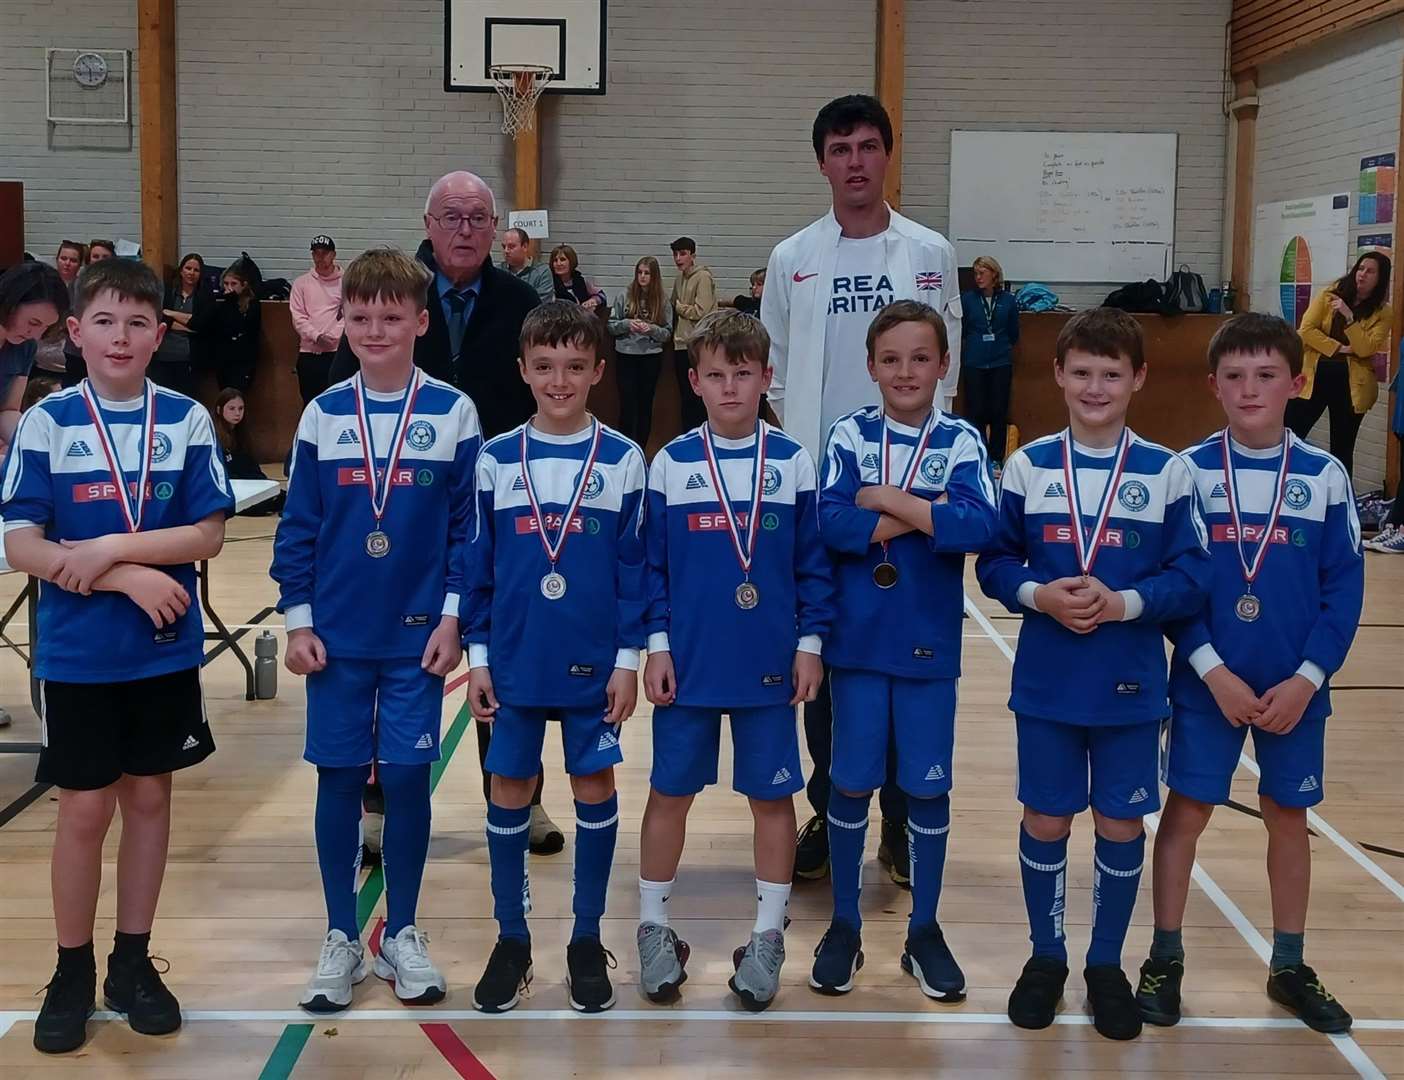 The Golspie boys' team who came second in the Big Schools category.